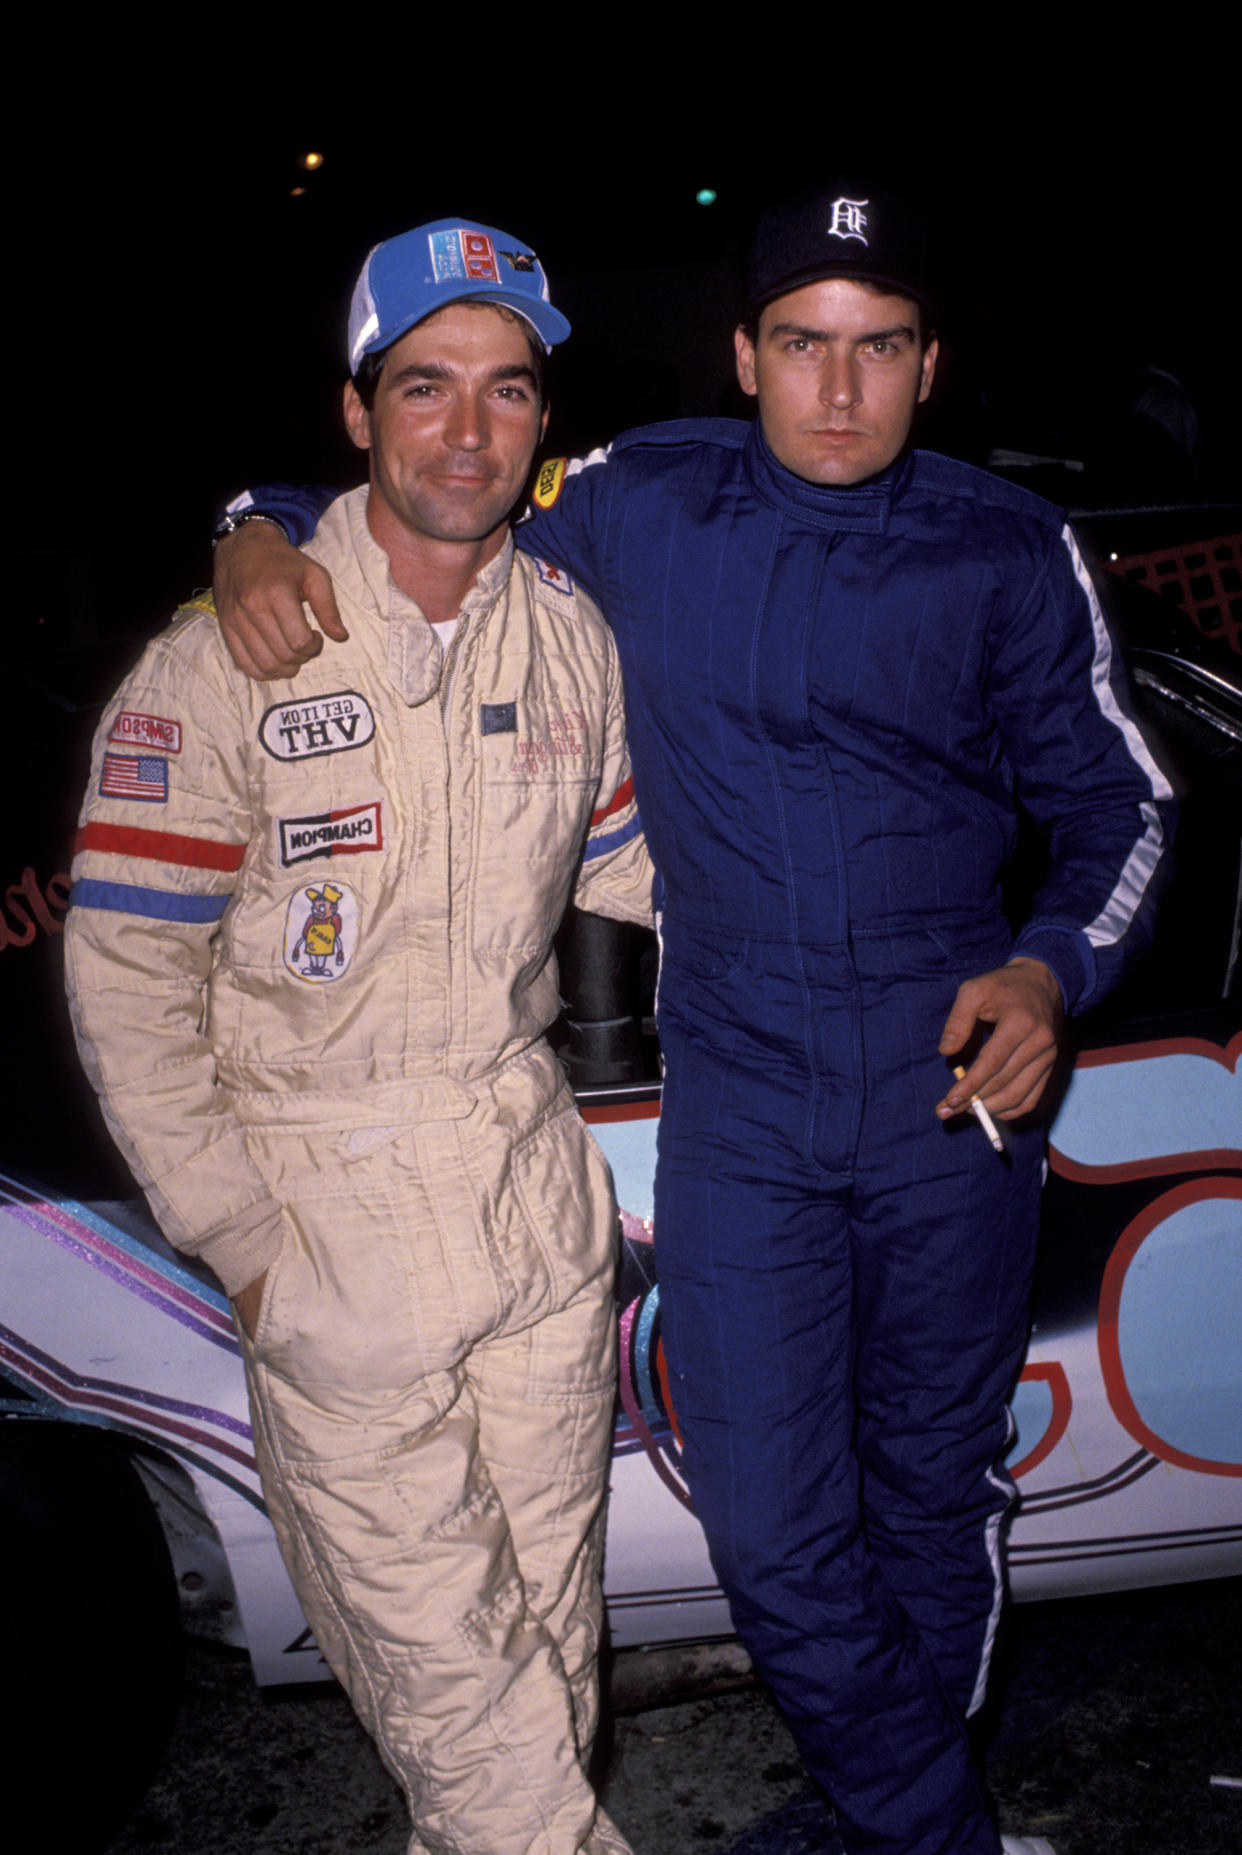 Eddie Braun and Charlie Sheen (Photo by Ron Galella/Ron Galella Collection via Getty Images)